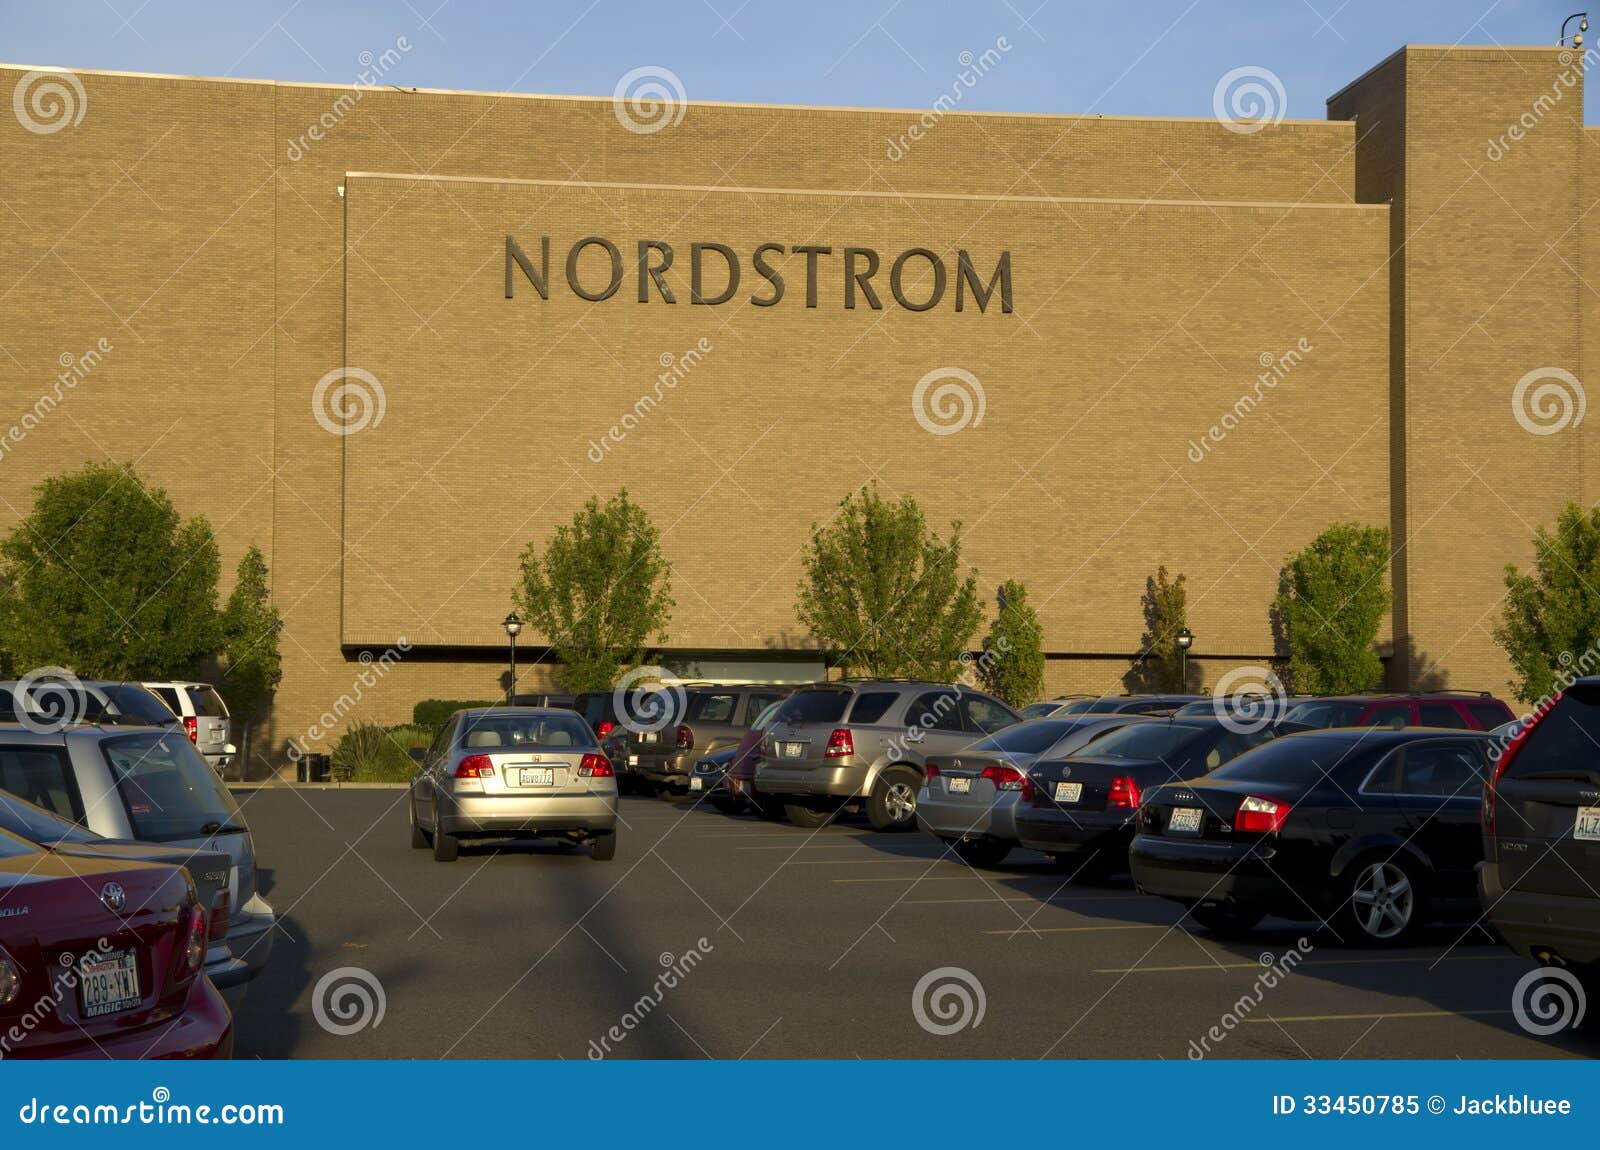 Nordstrom department store Editorial Image